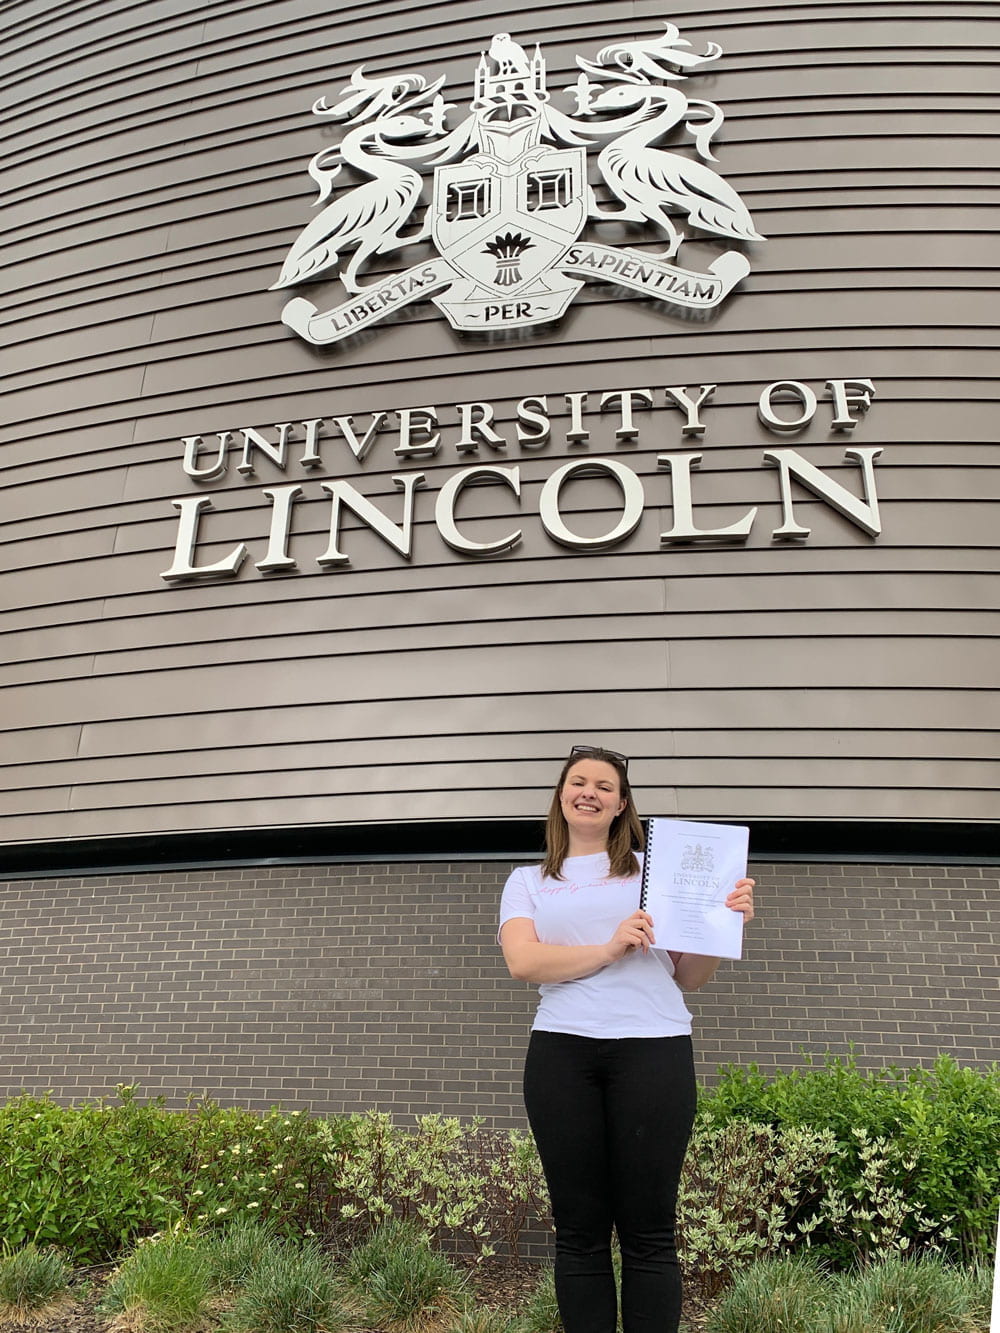 A young woman holding a dissertation and smiling in front of the University of Lincoln logo on a building